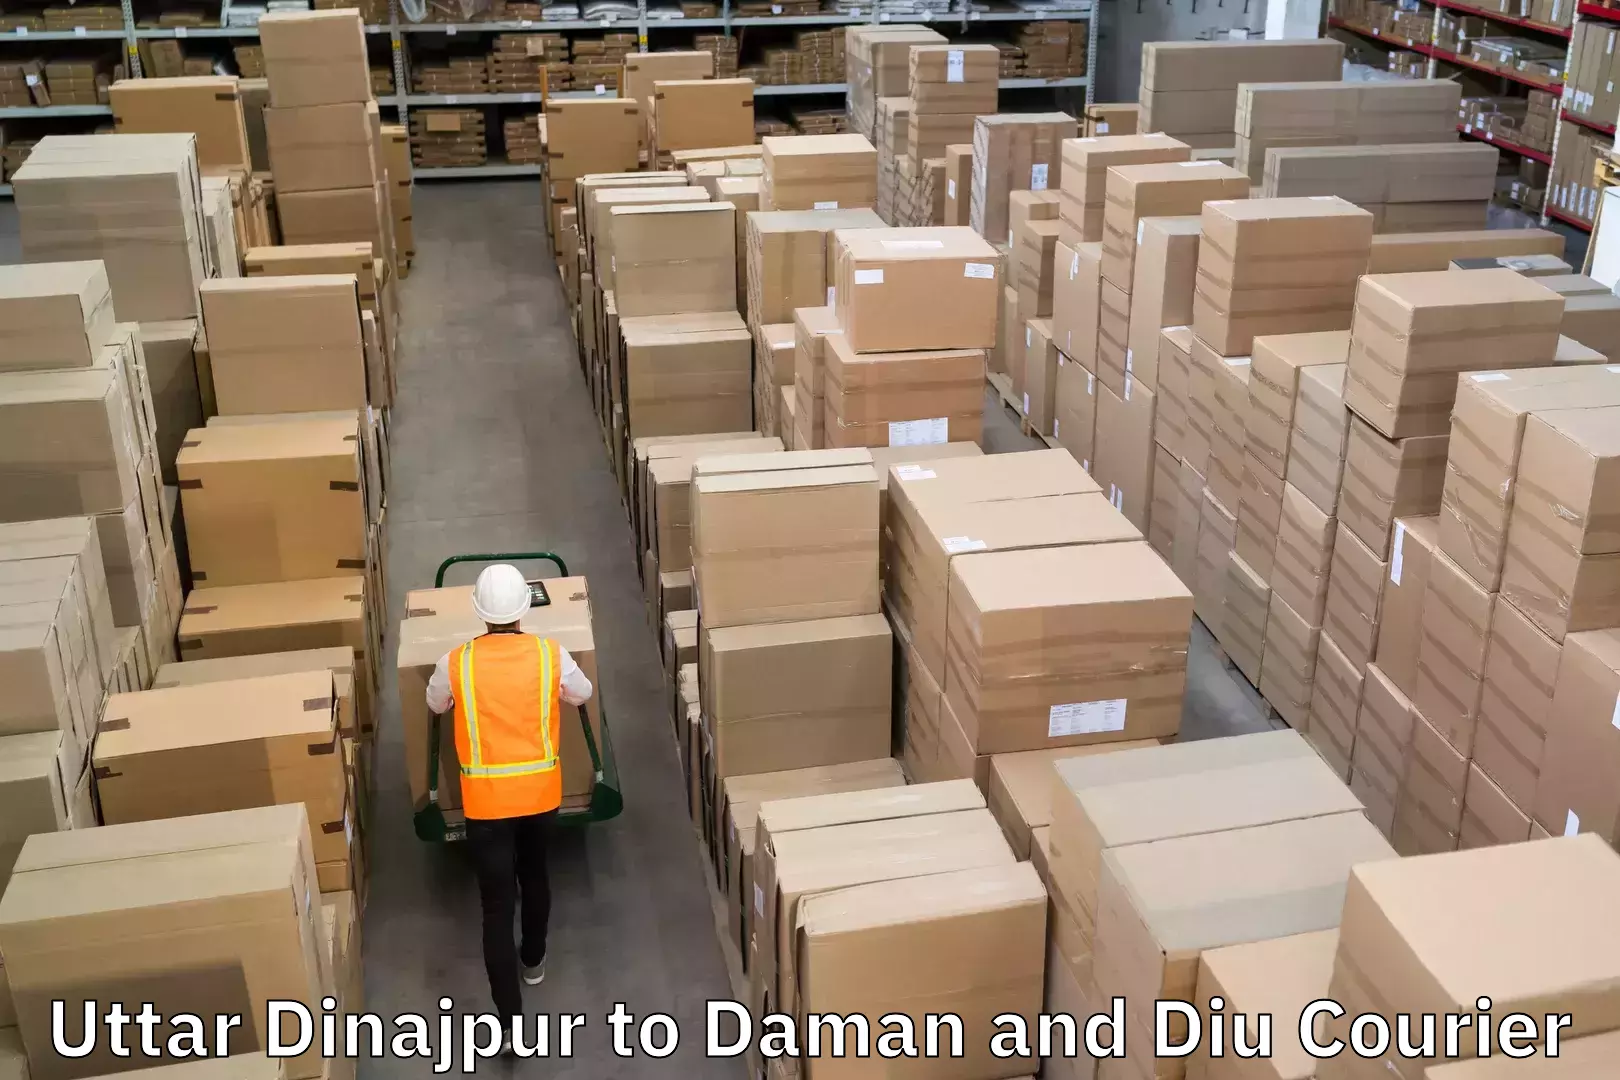 Sustainable delivery practices Uttar Dinajpur to Daman and Diu